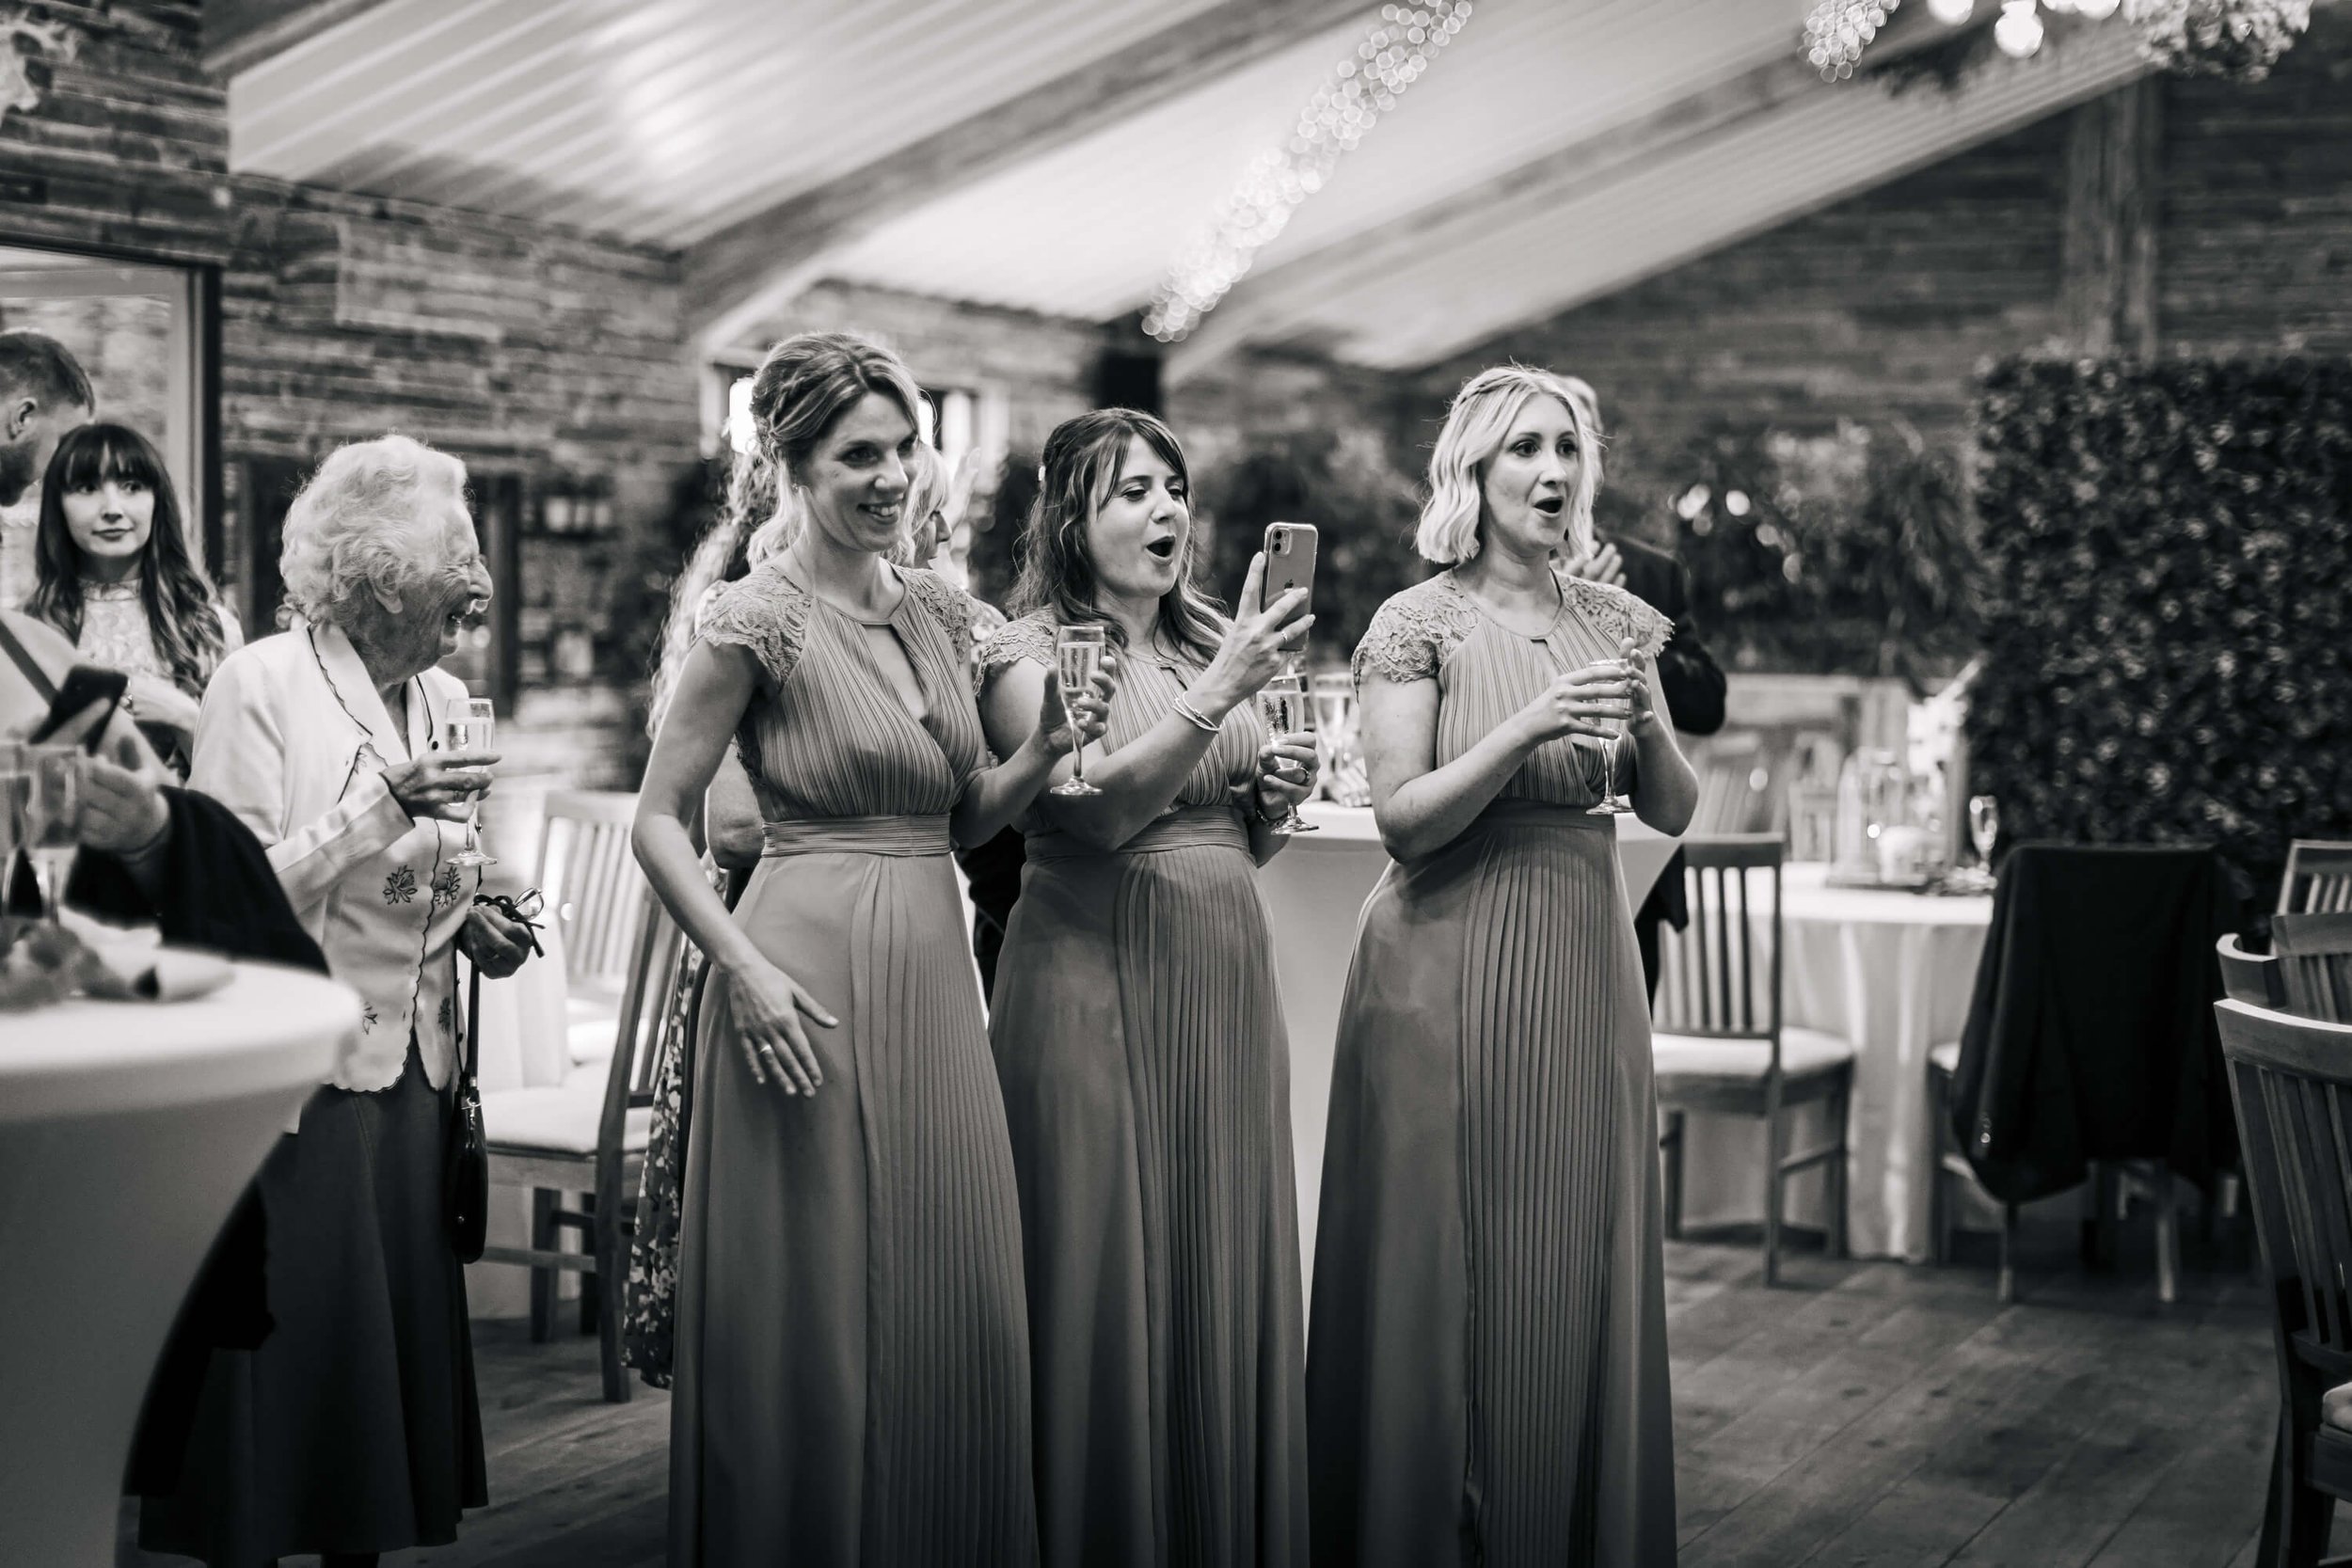 Bridesmaids filming the speeches at a wedding